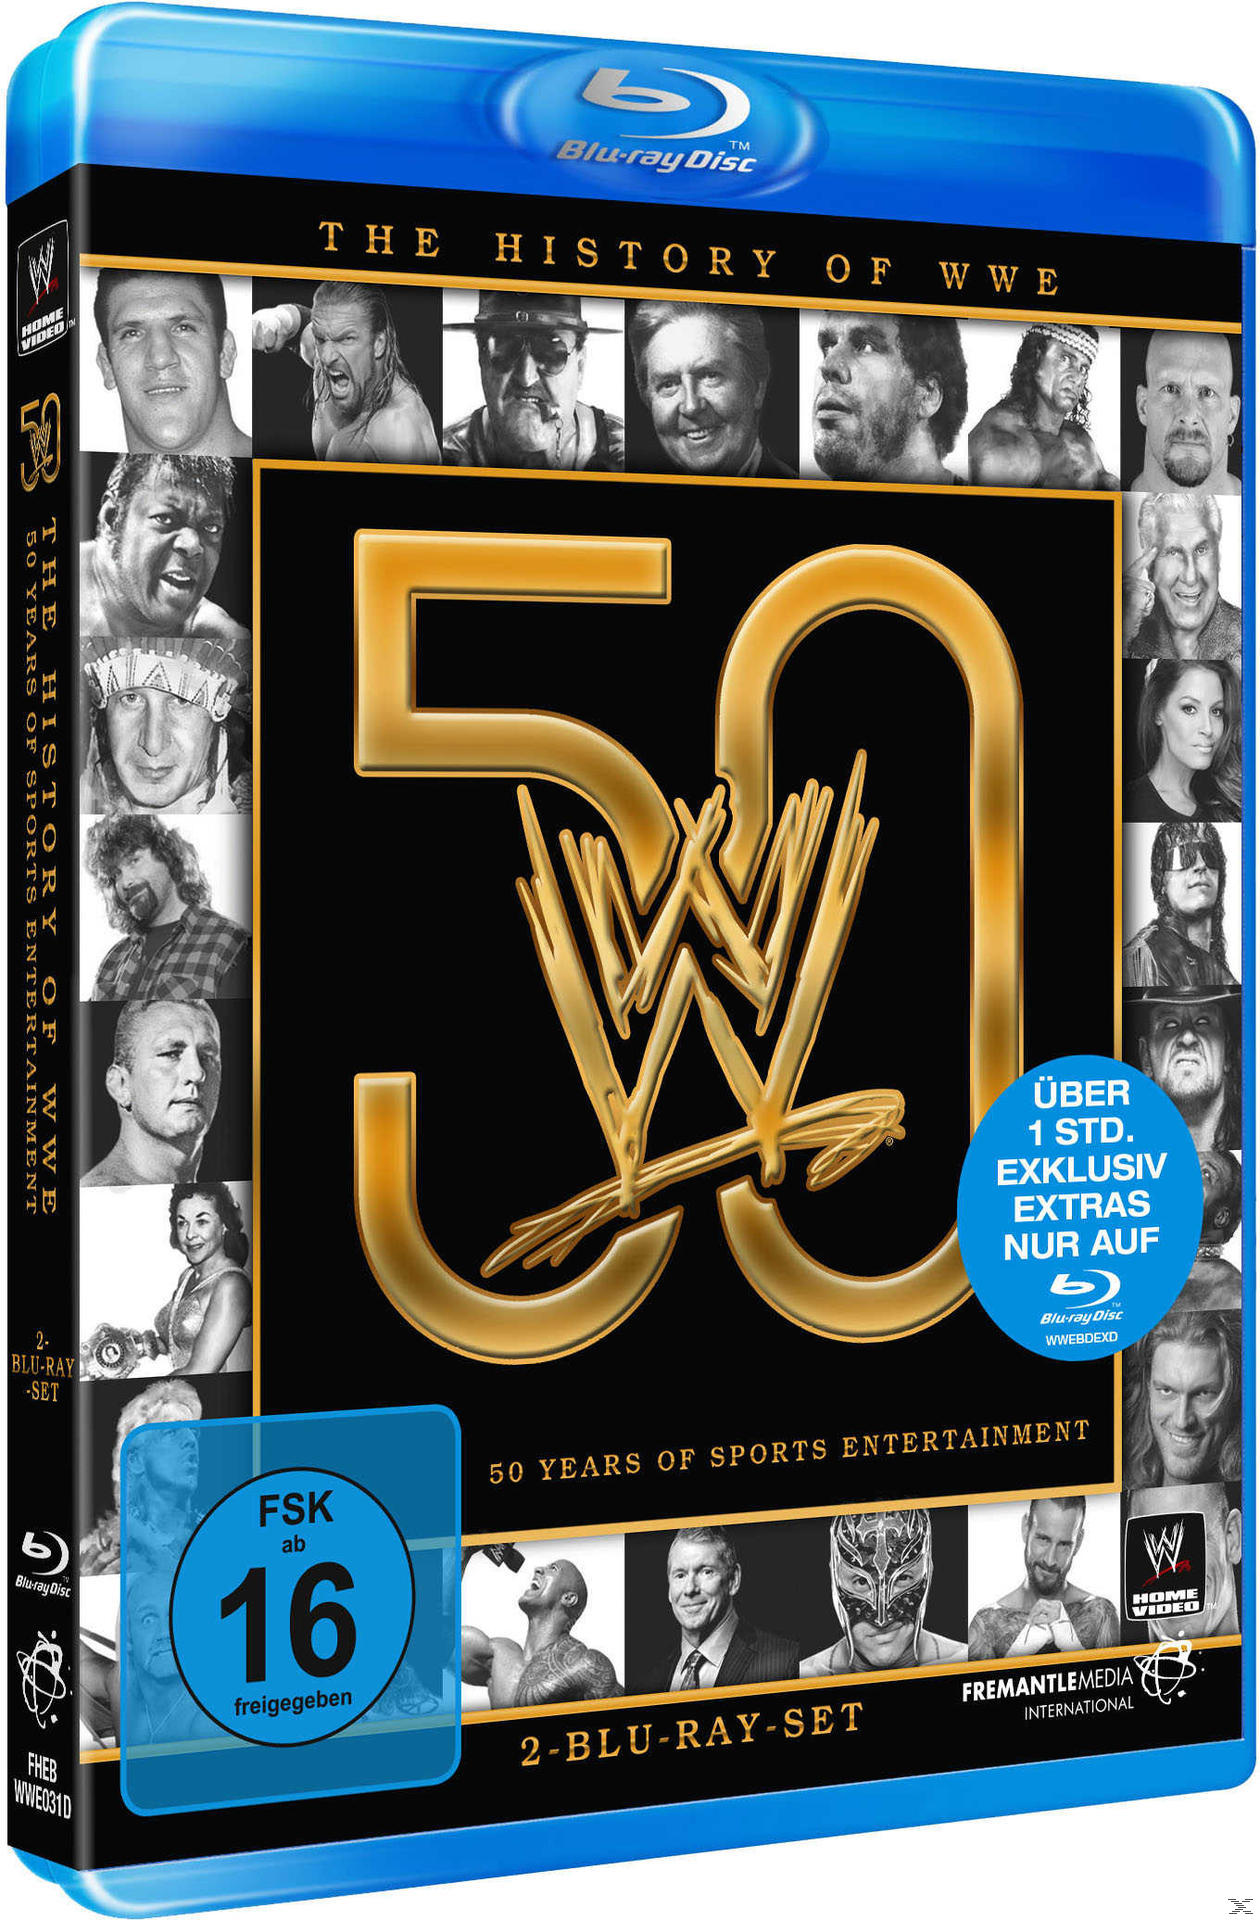 The History years entertainment 50 of sports WWE: of Blu-ray